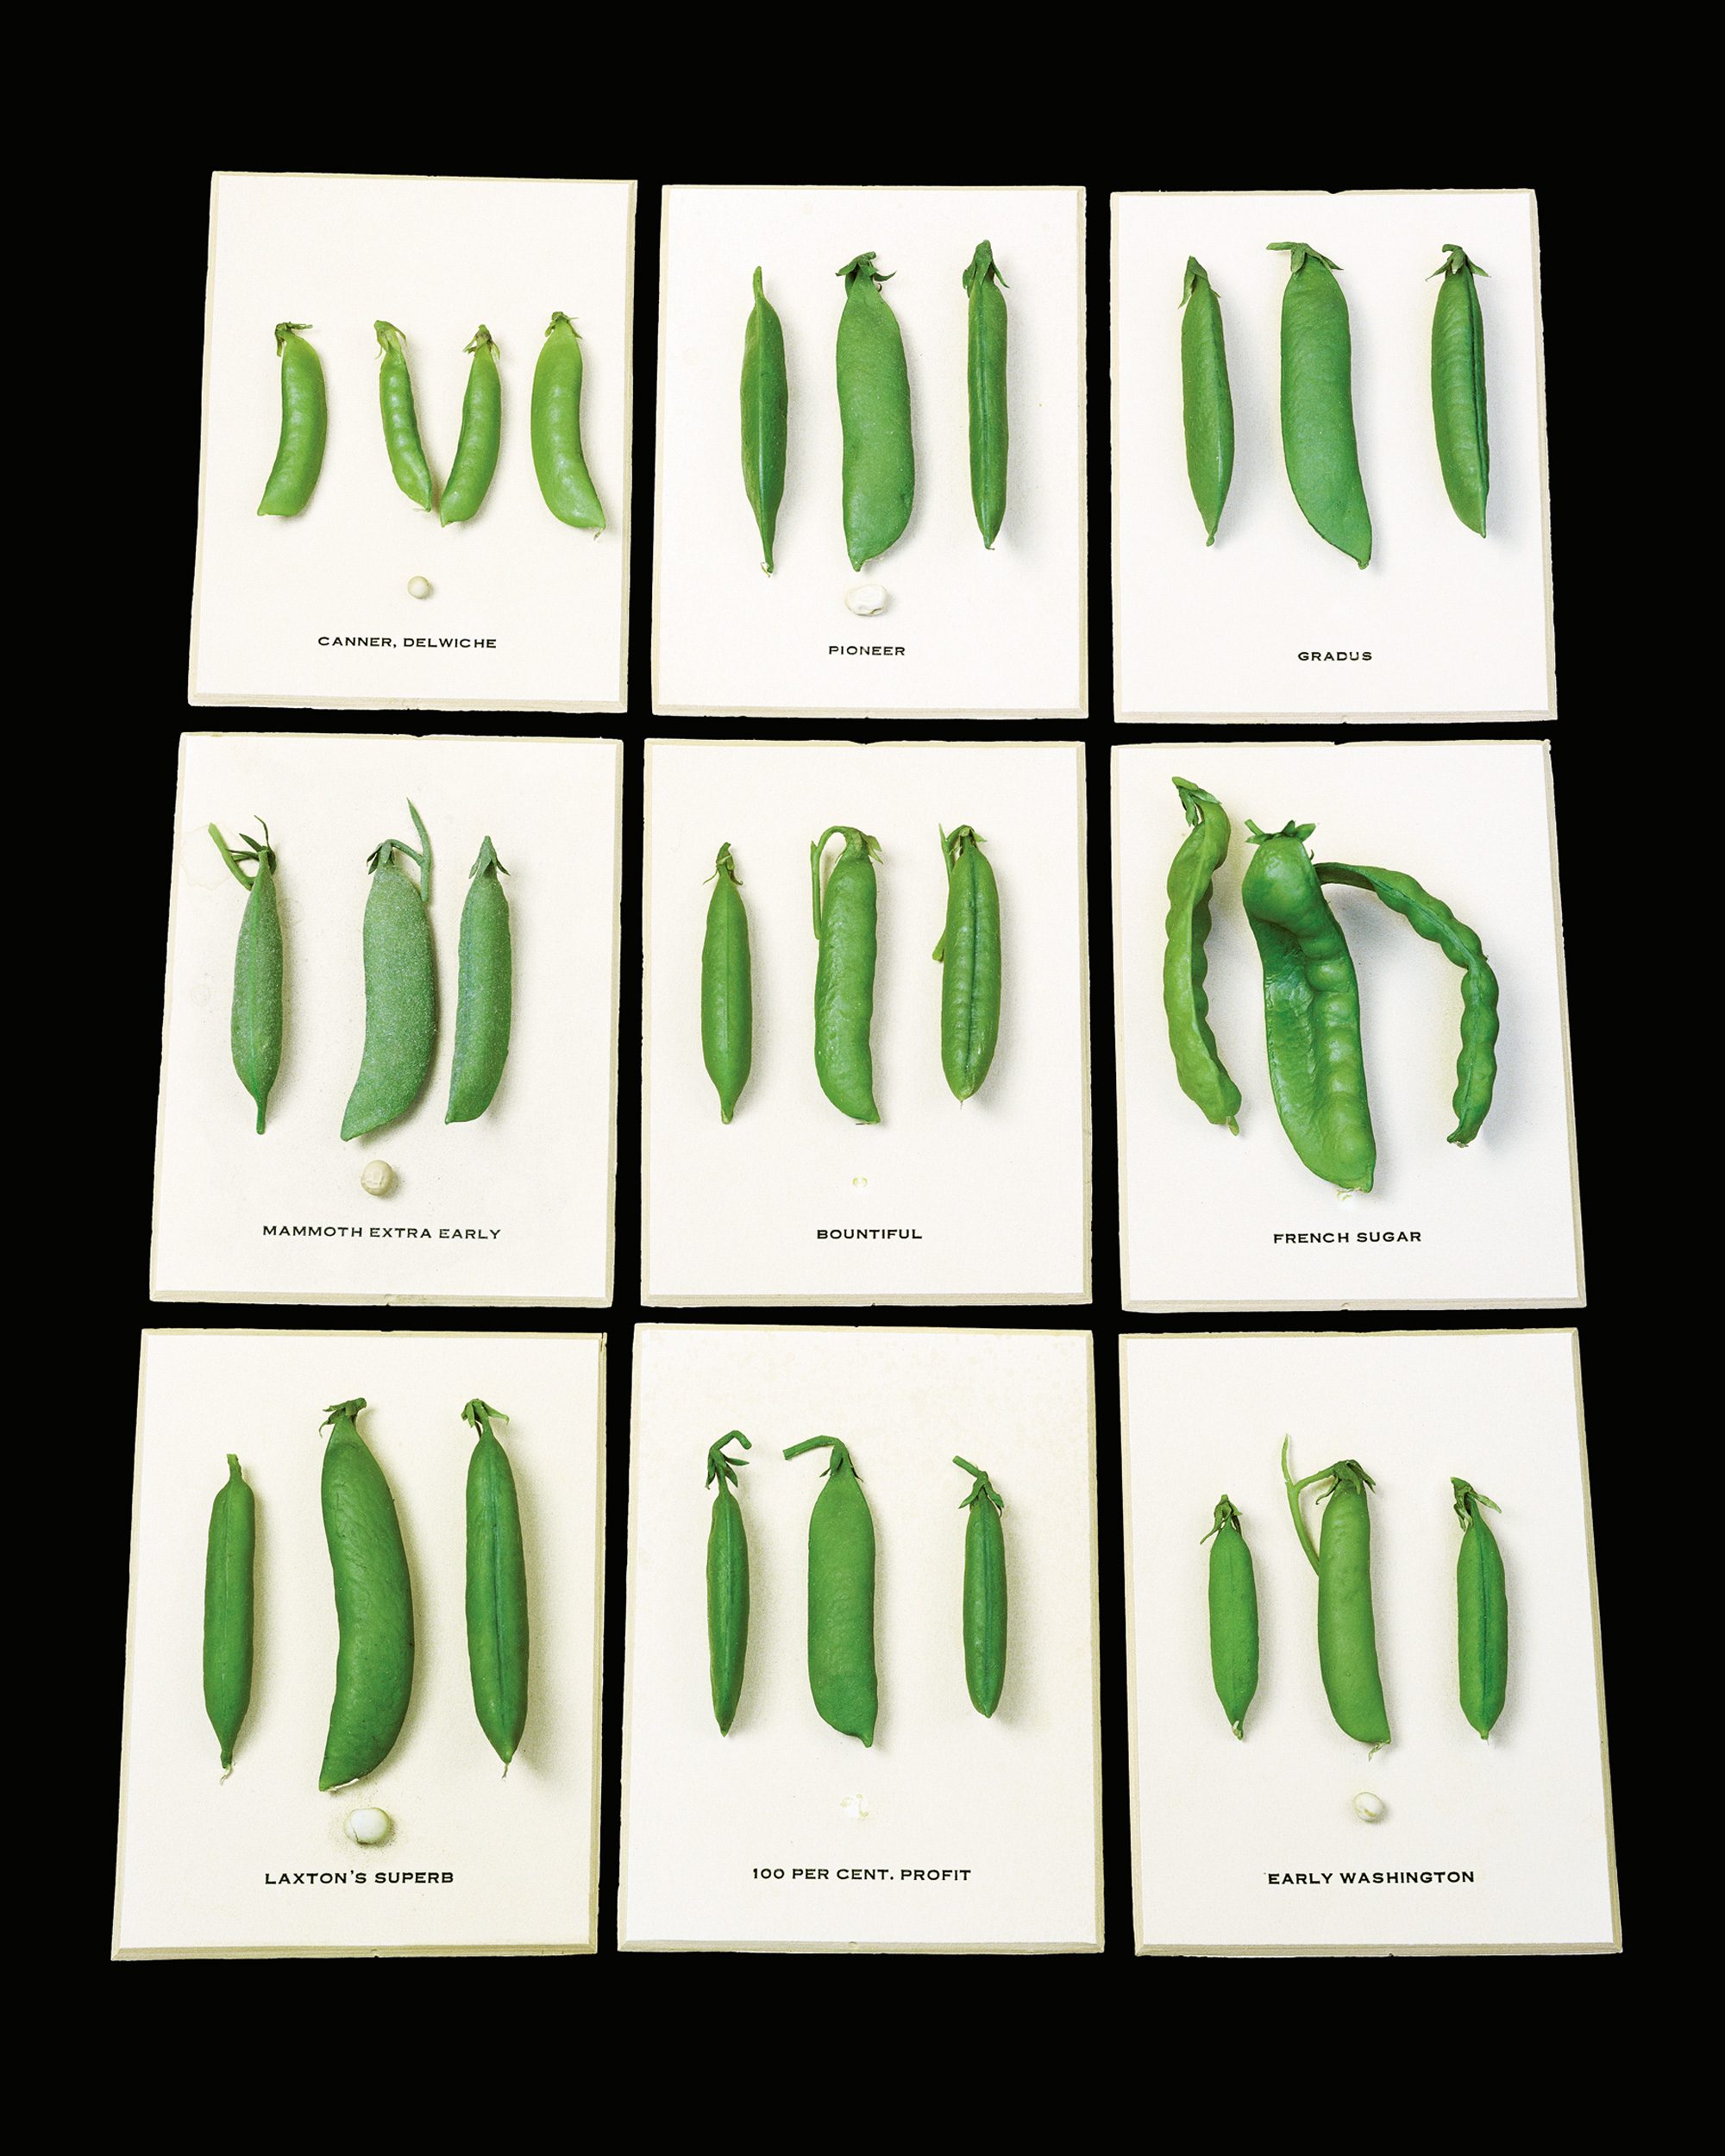 A two thousand and nine wax agricultural model of beans titled “Bountiful.”